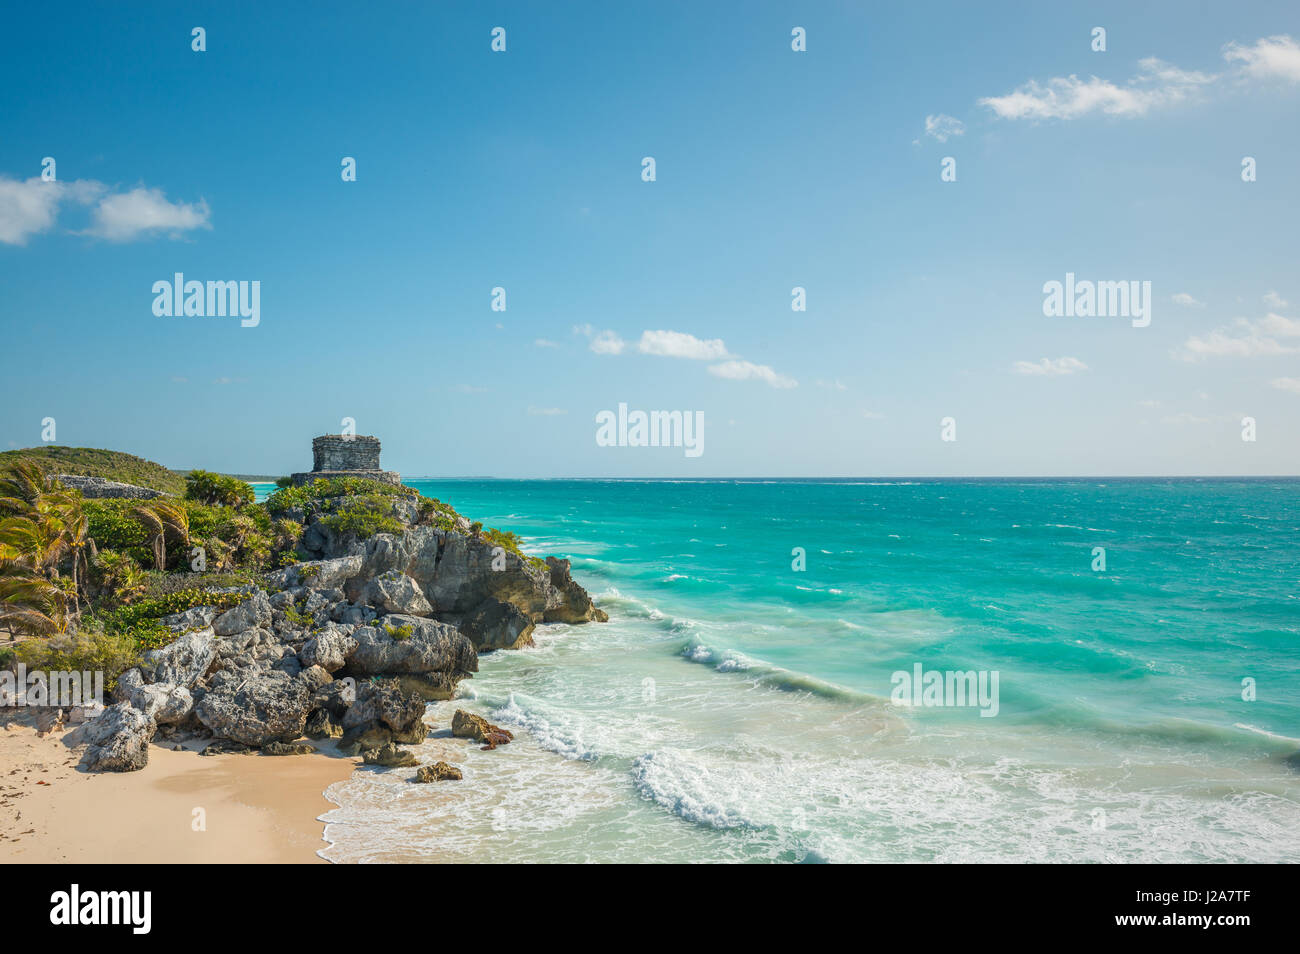 The Caribbean Sea with turquoise waters and white sand beach as a backdrop for the Tulum Maya ruins, Mexico. Stock Photo